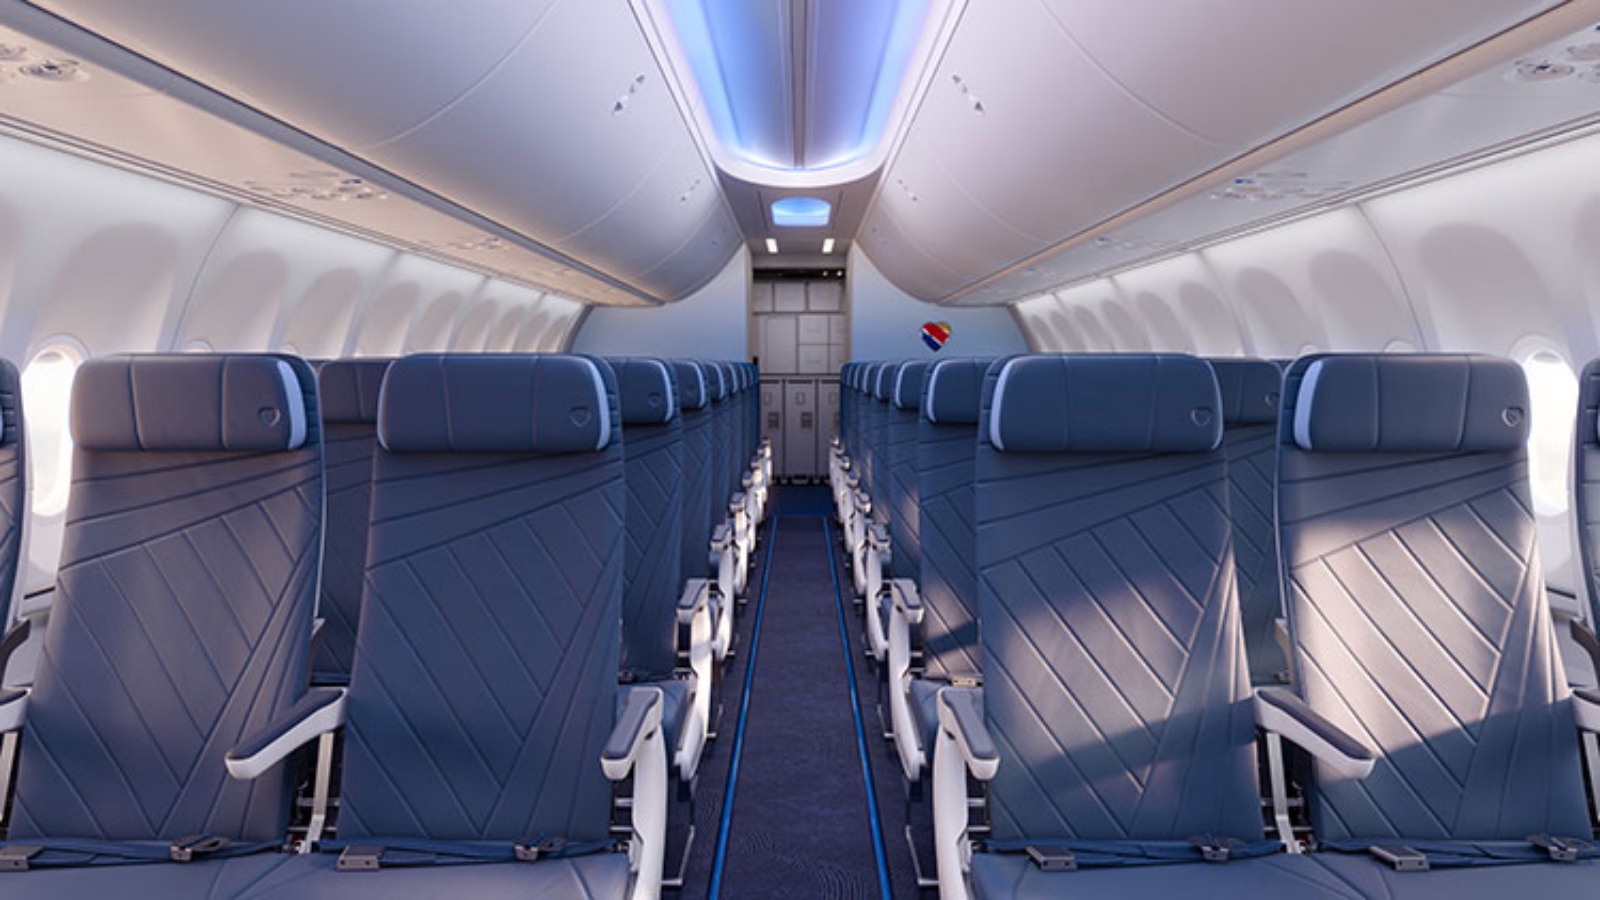 new Southwest Airlines seats and cabin layout